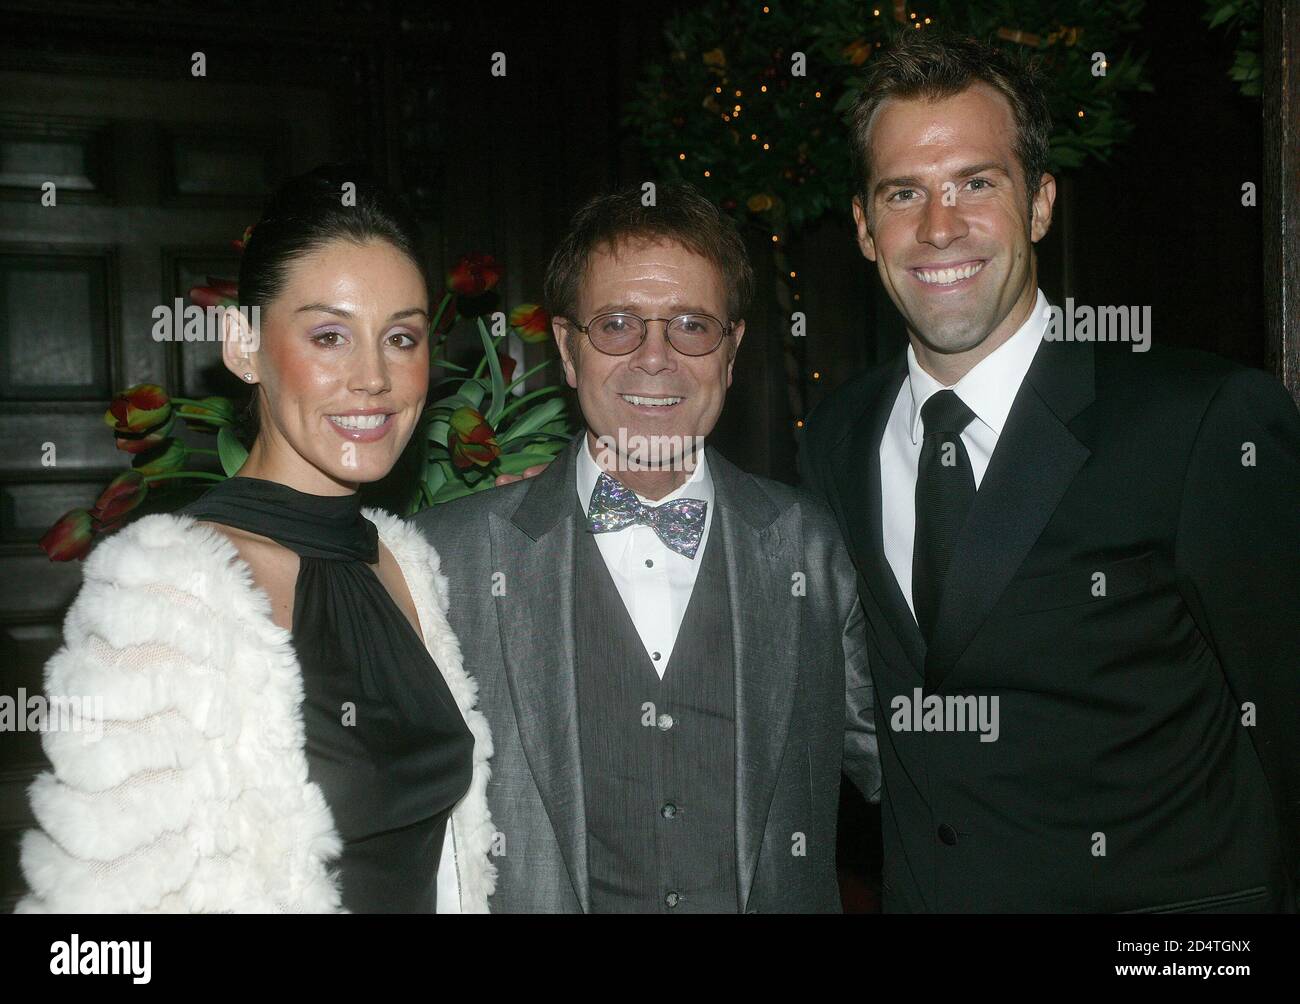 Cliff Richard's Tennis Foundation Dinner at Hampton Court 11th Dec 2003: Cliff Richard with Greg and Lucy Rusedski Stock Photo